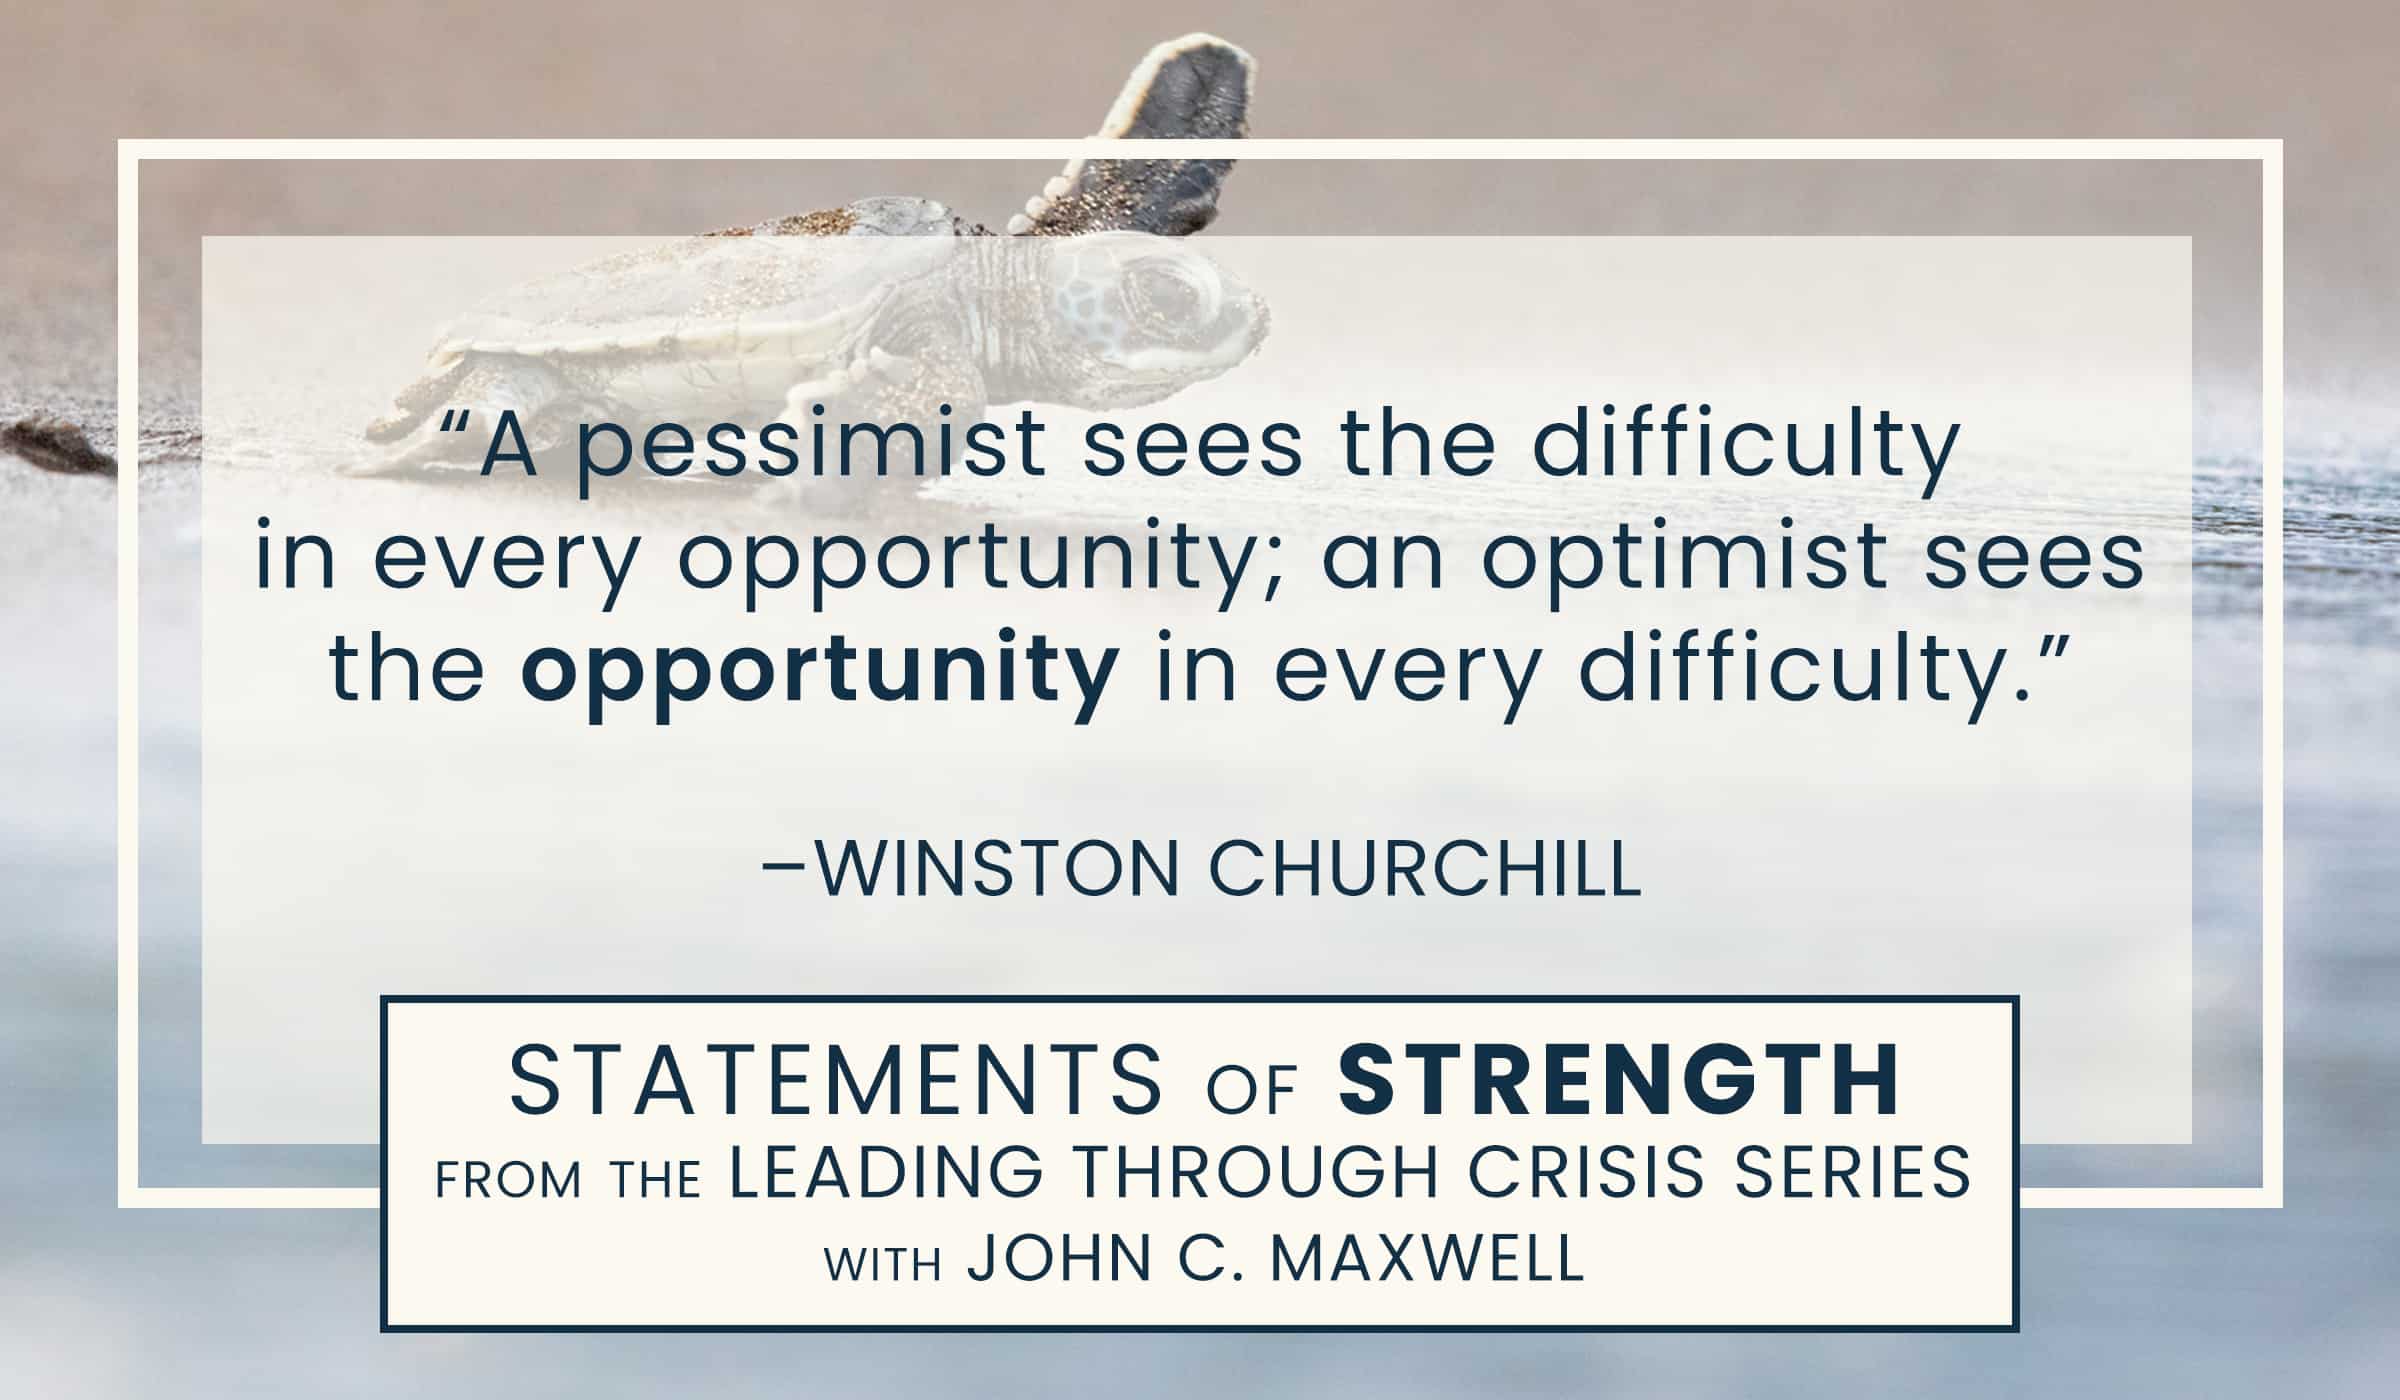 image of quotation picture with text quote of winston churchill about opportunity and difficulties